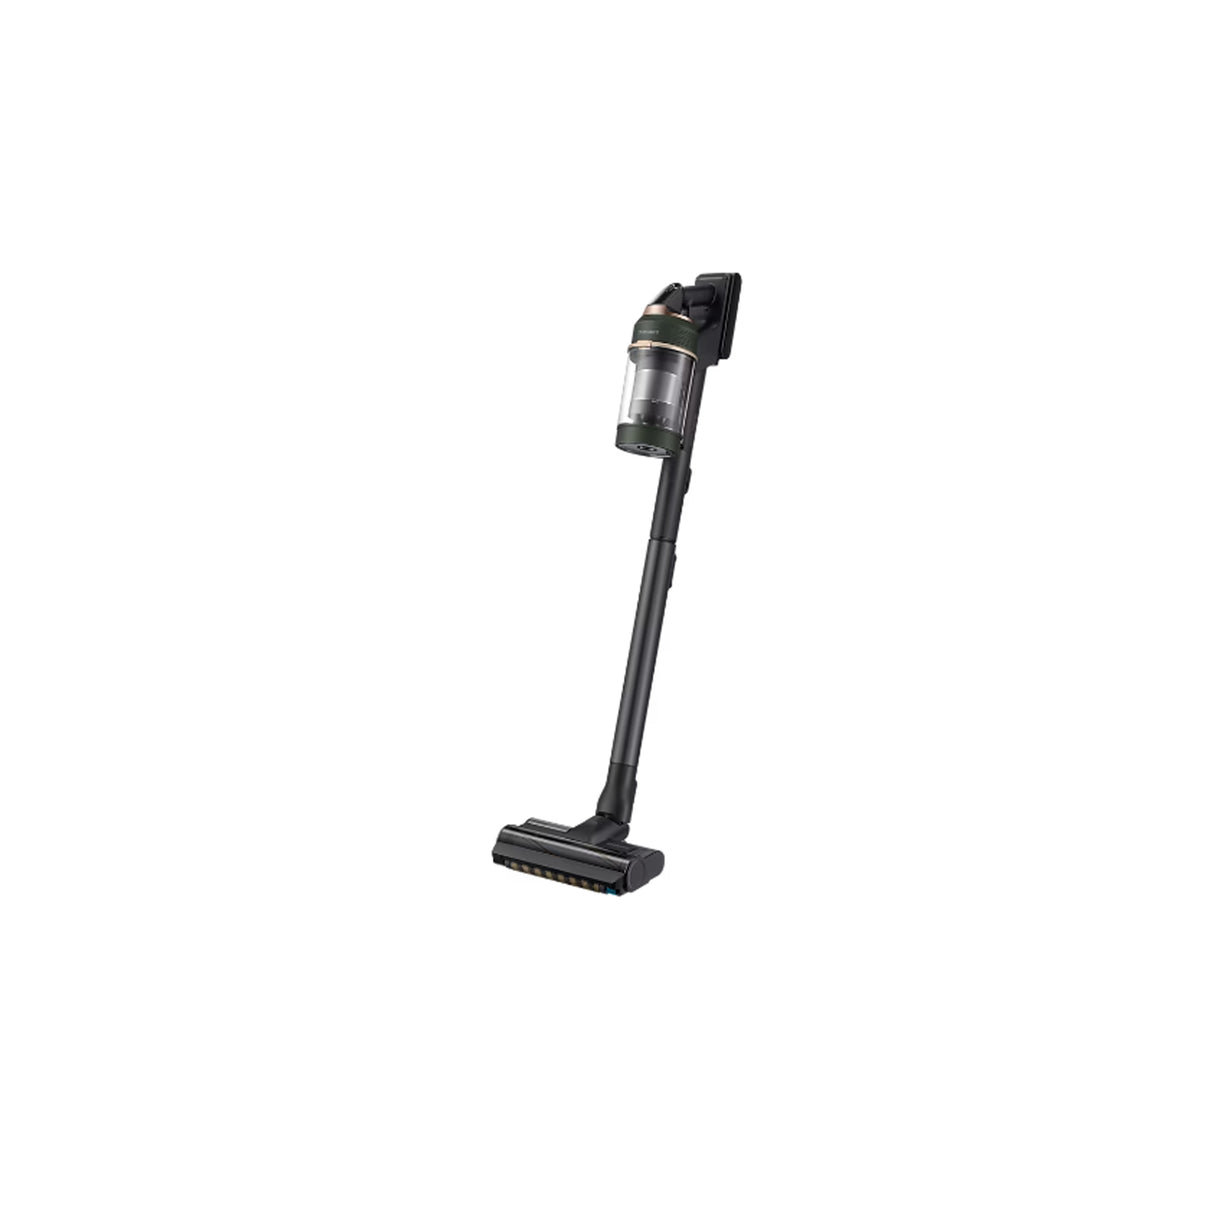 Samsung Bespoke Jet Pet - Cordless Stick Vacuum Cleaner with All In One Clean Station